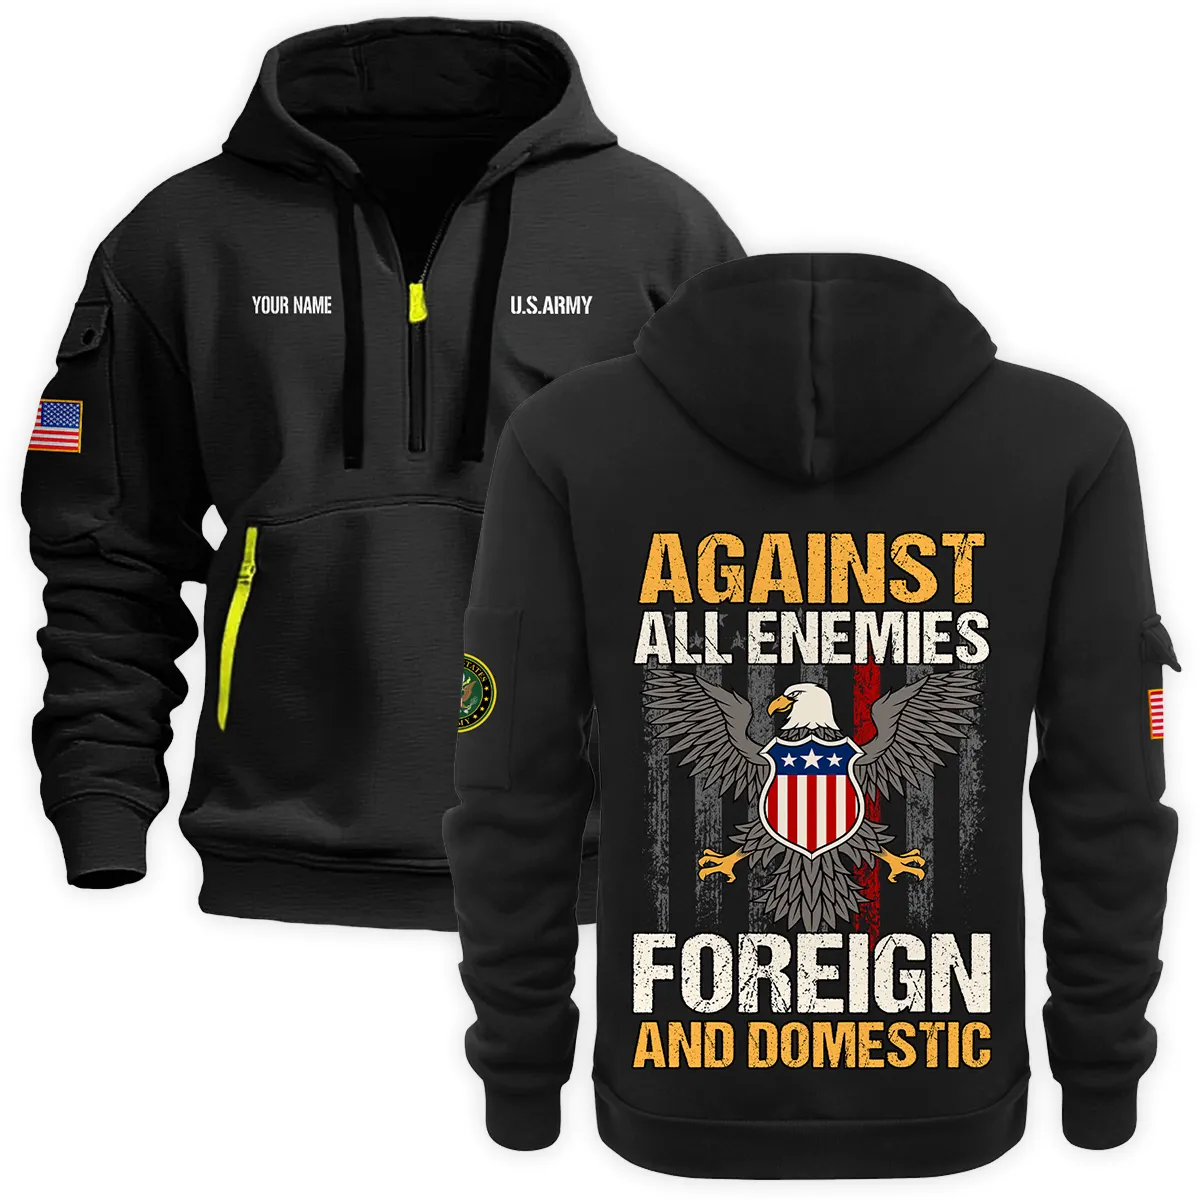 Personalized Name Against All Enemies Foreign And Domestic U.S. Army Veteran Hoodie Half Zipper Quarter Hoodie